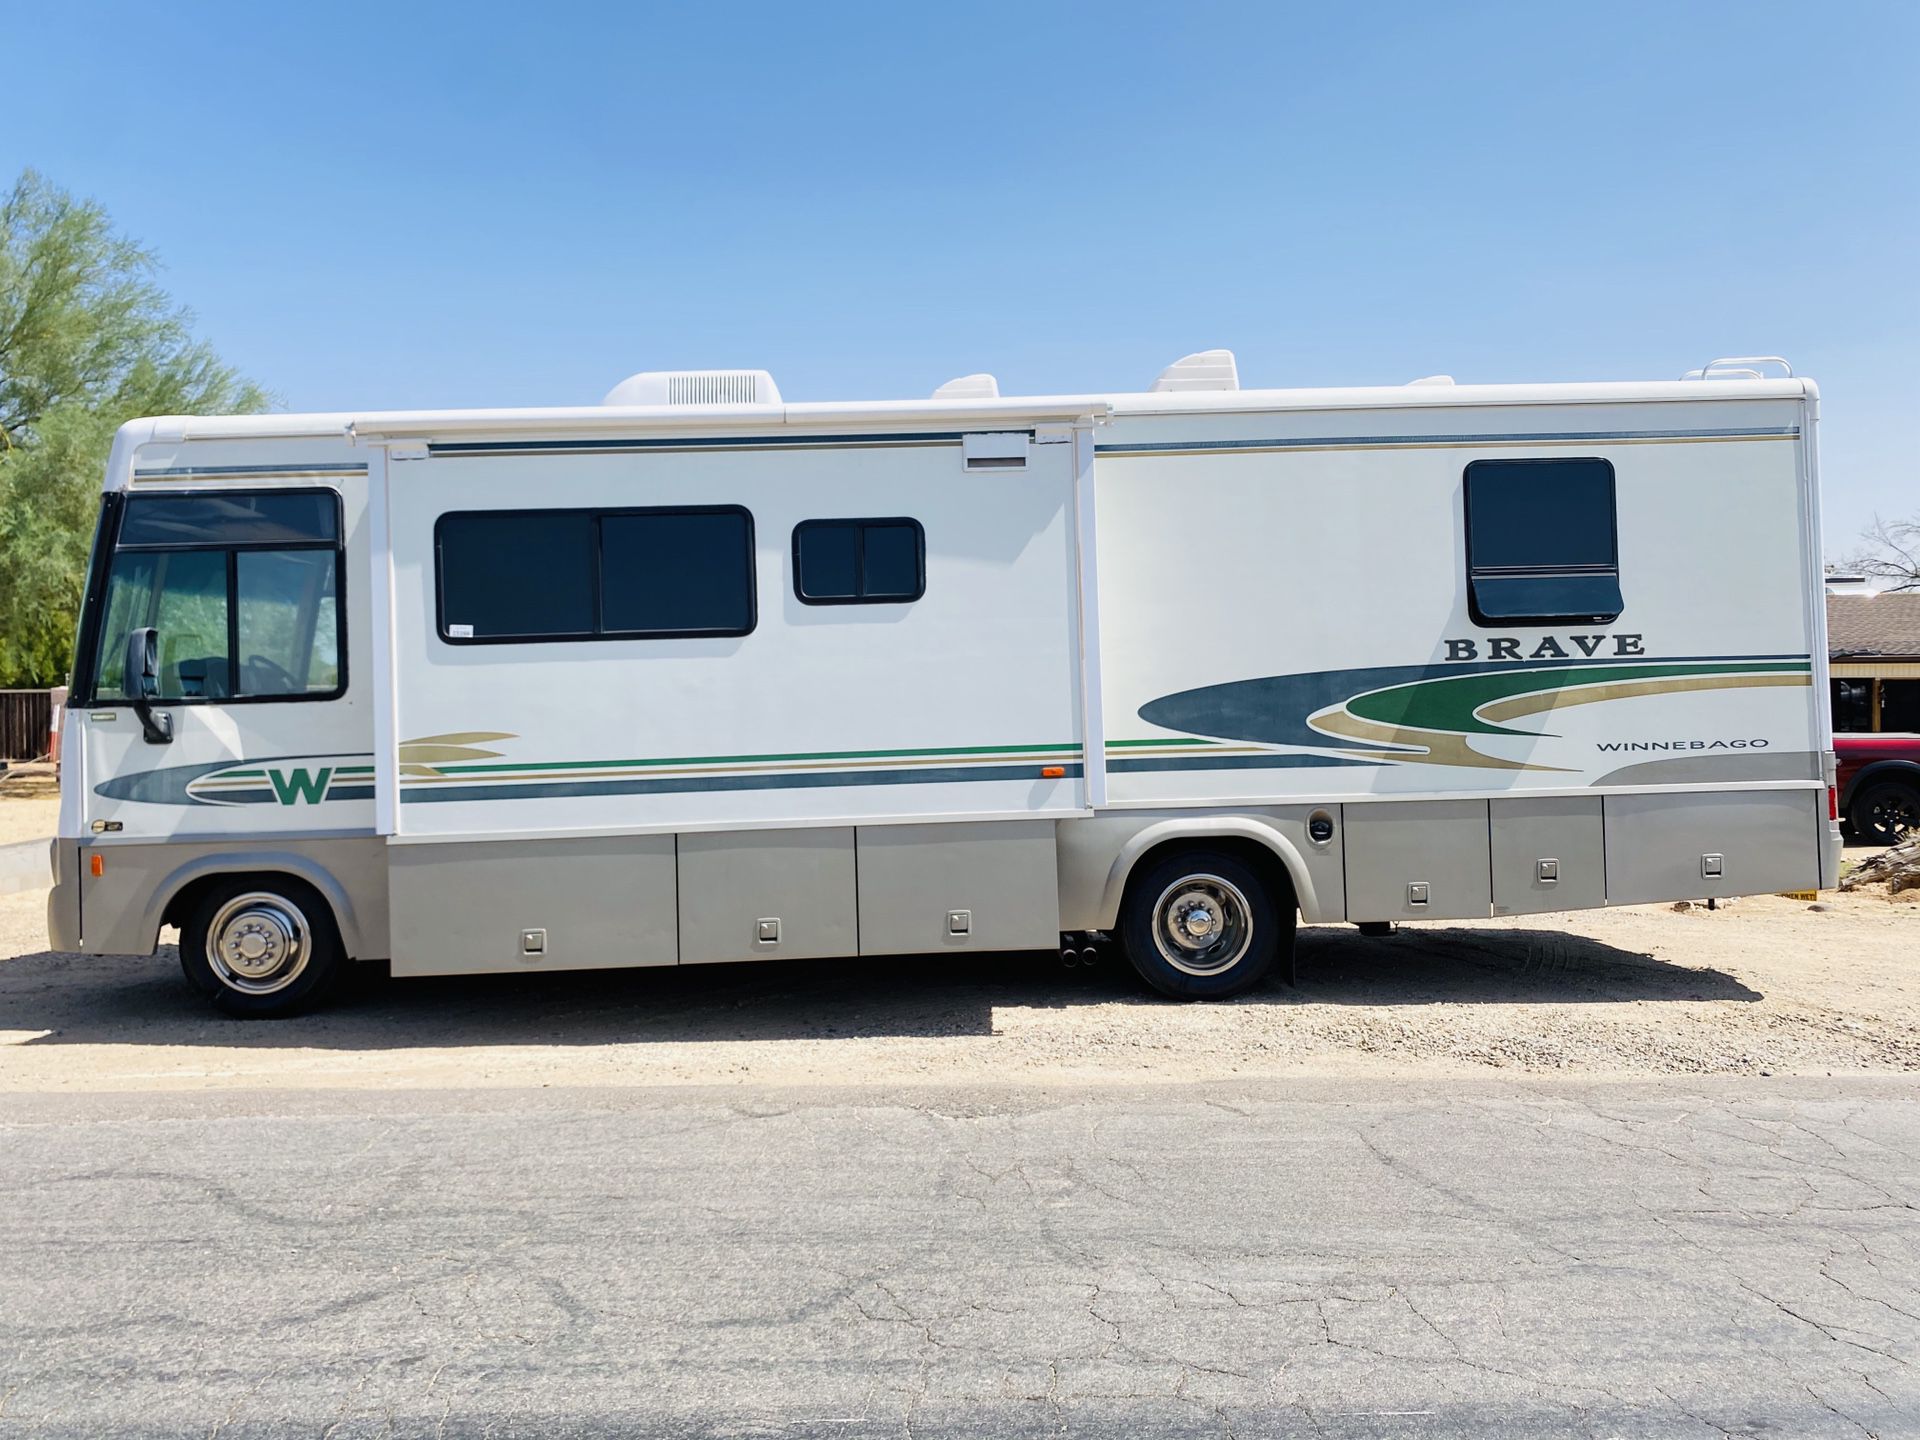 I am selling my 2003 Winnebago brave 29 foot class A motorhome with one large slide out everything works great only 80,000 original miles no problems